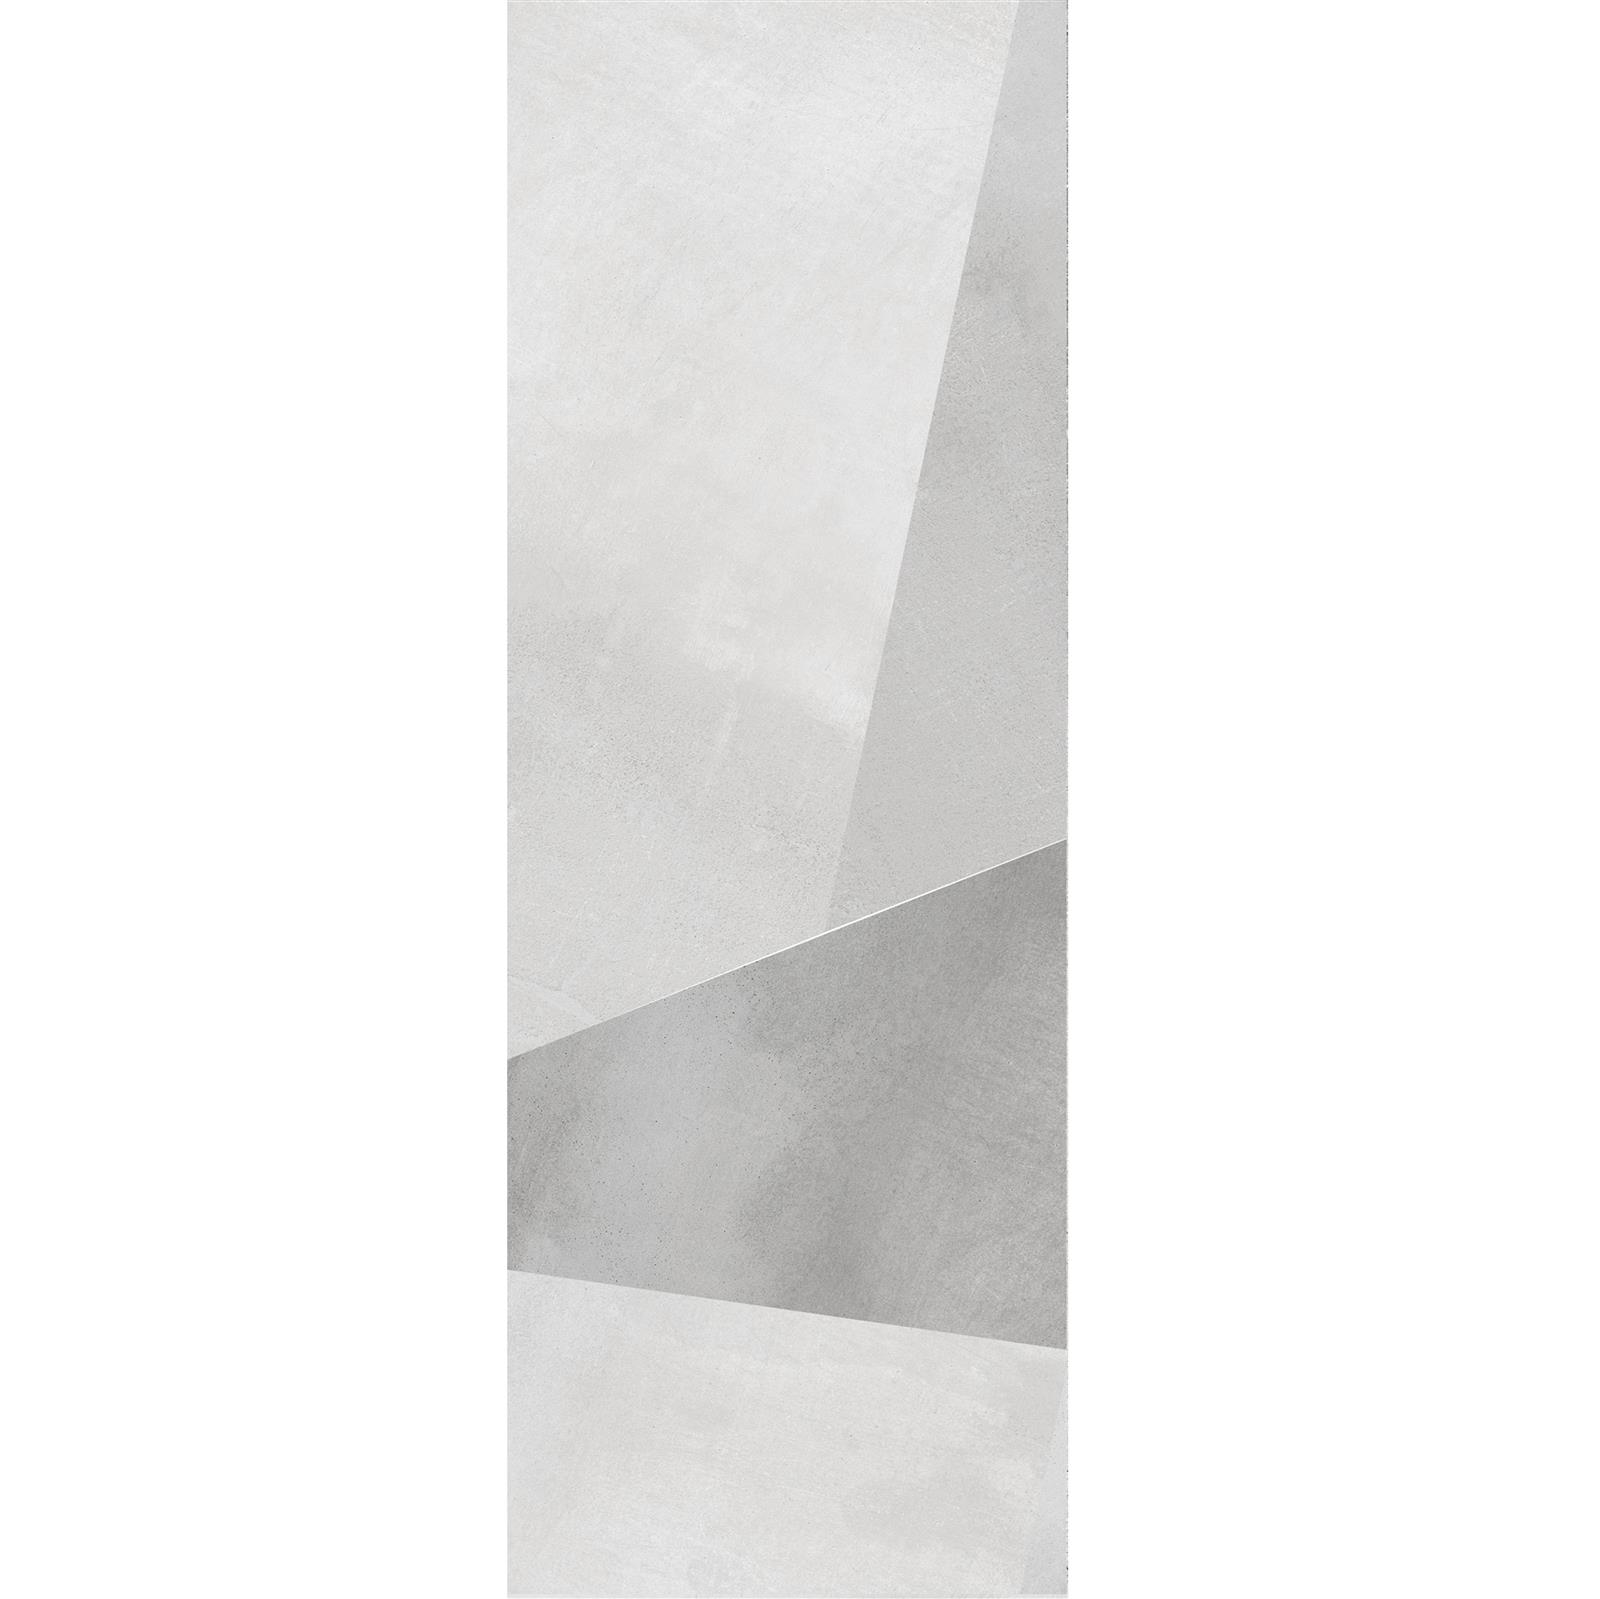 Wall Tiles Queens Rectified White Decor 9 30x90cm